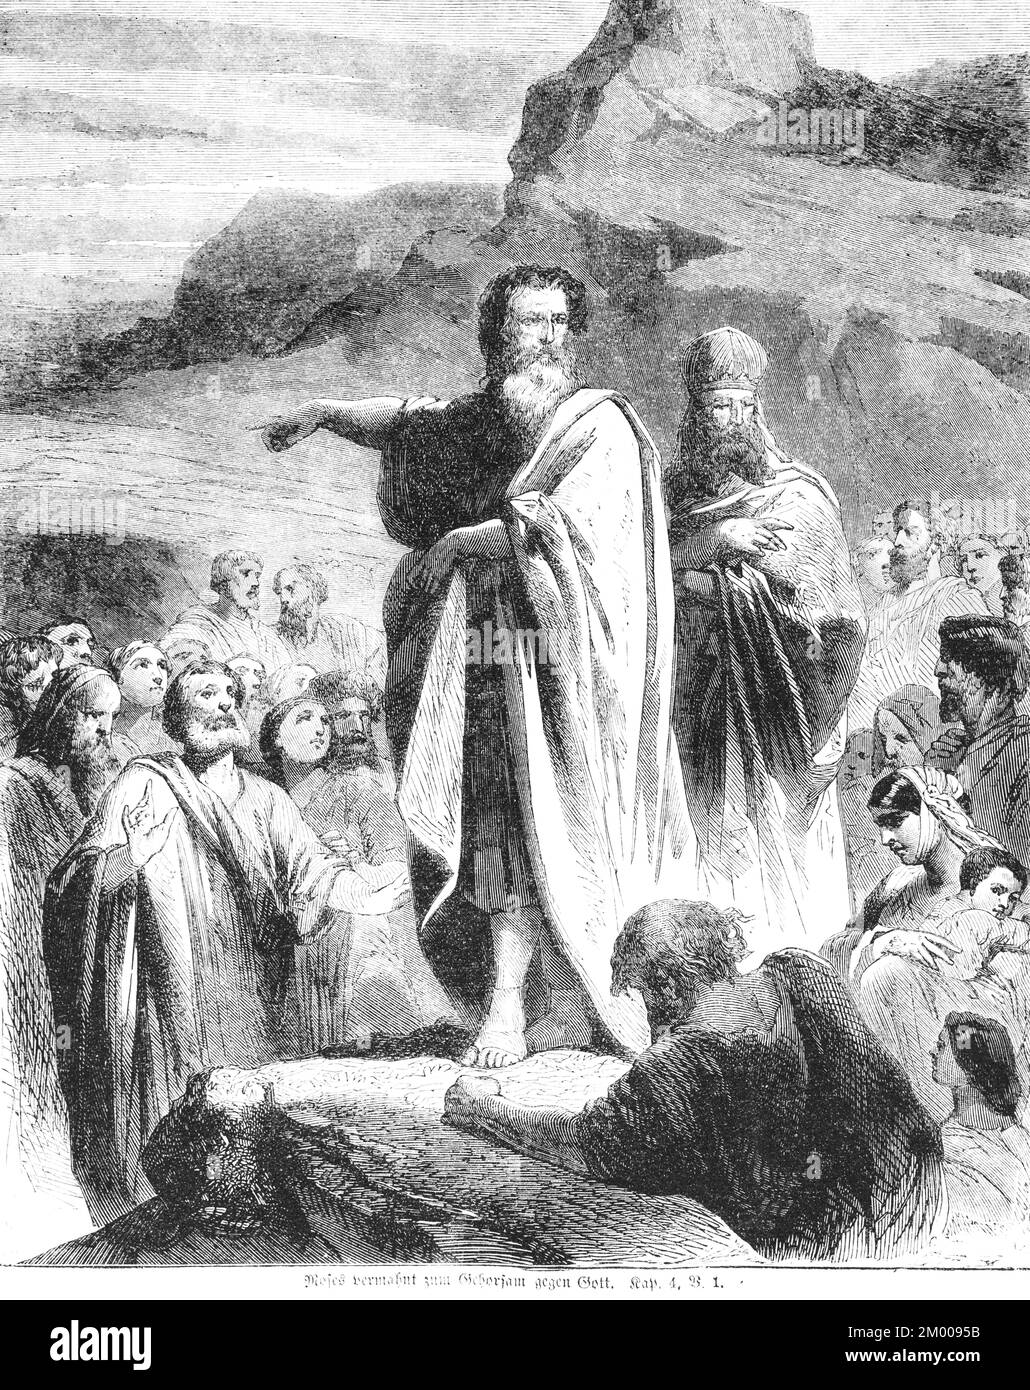 Moses exhorts to obey God, Israel, commandments, rights, teach, land, exhortation, speak, crowd, mountains, Bible, Old Testament, Book of Deuteronomy, Stock Photo